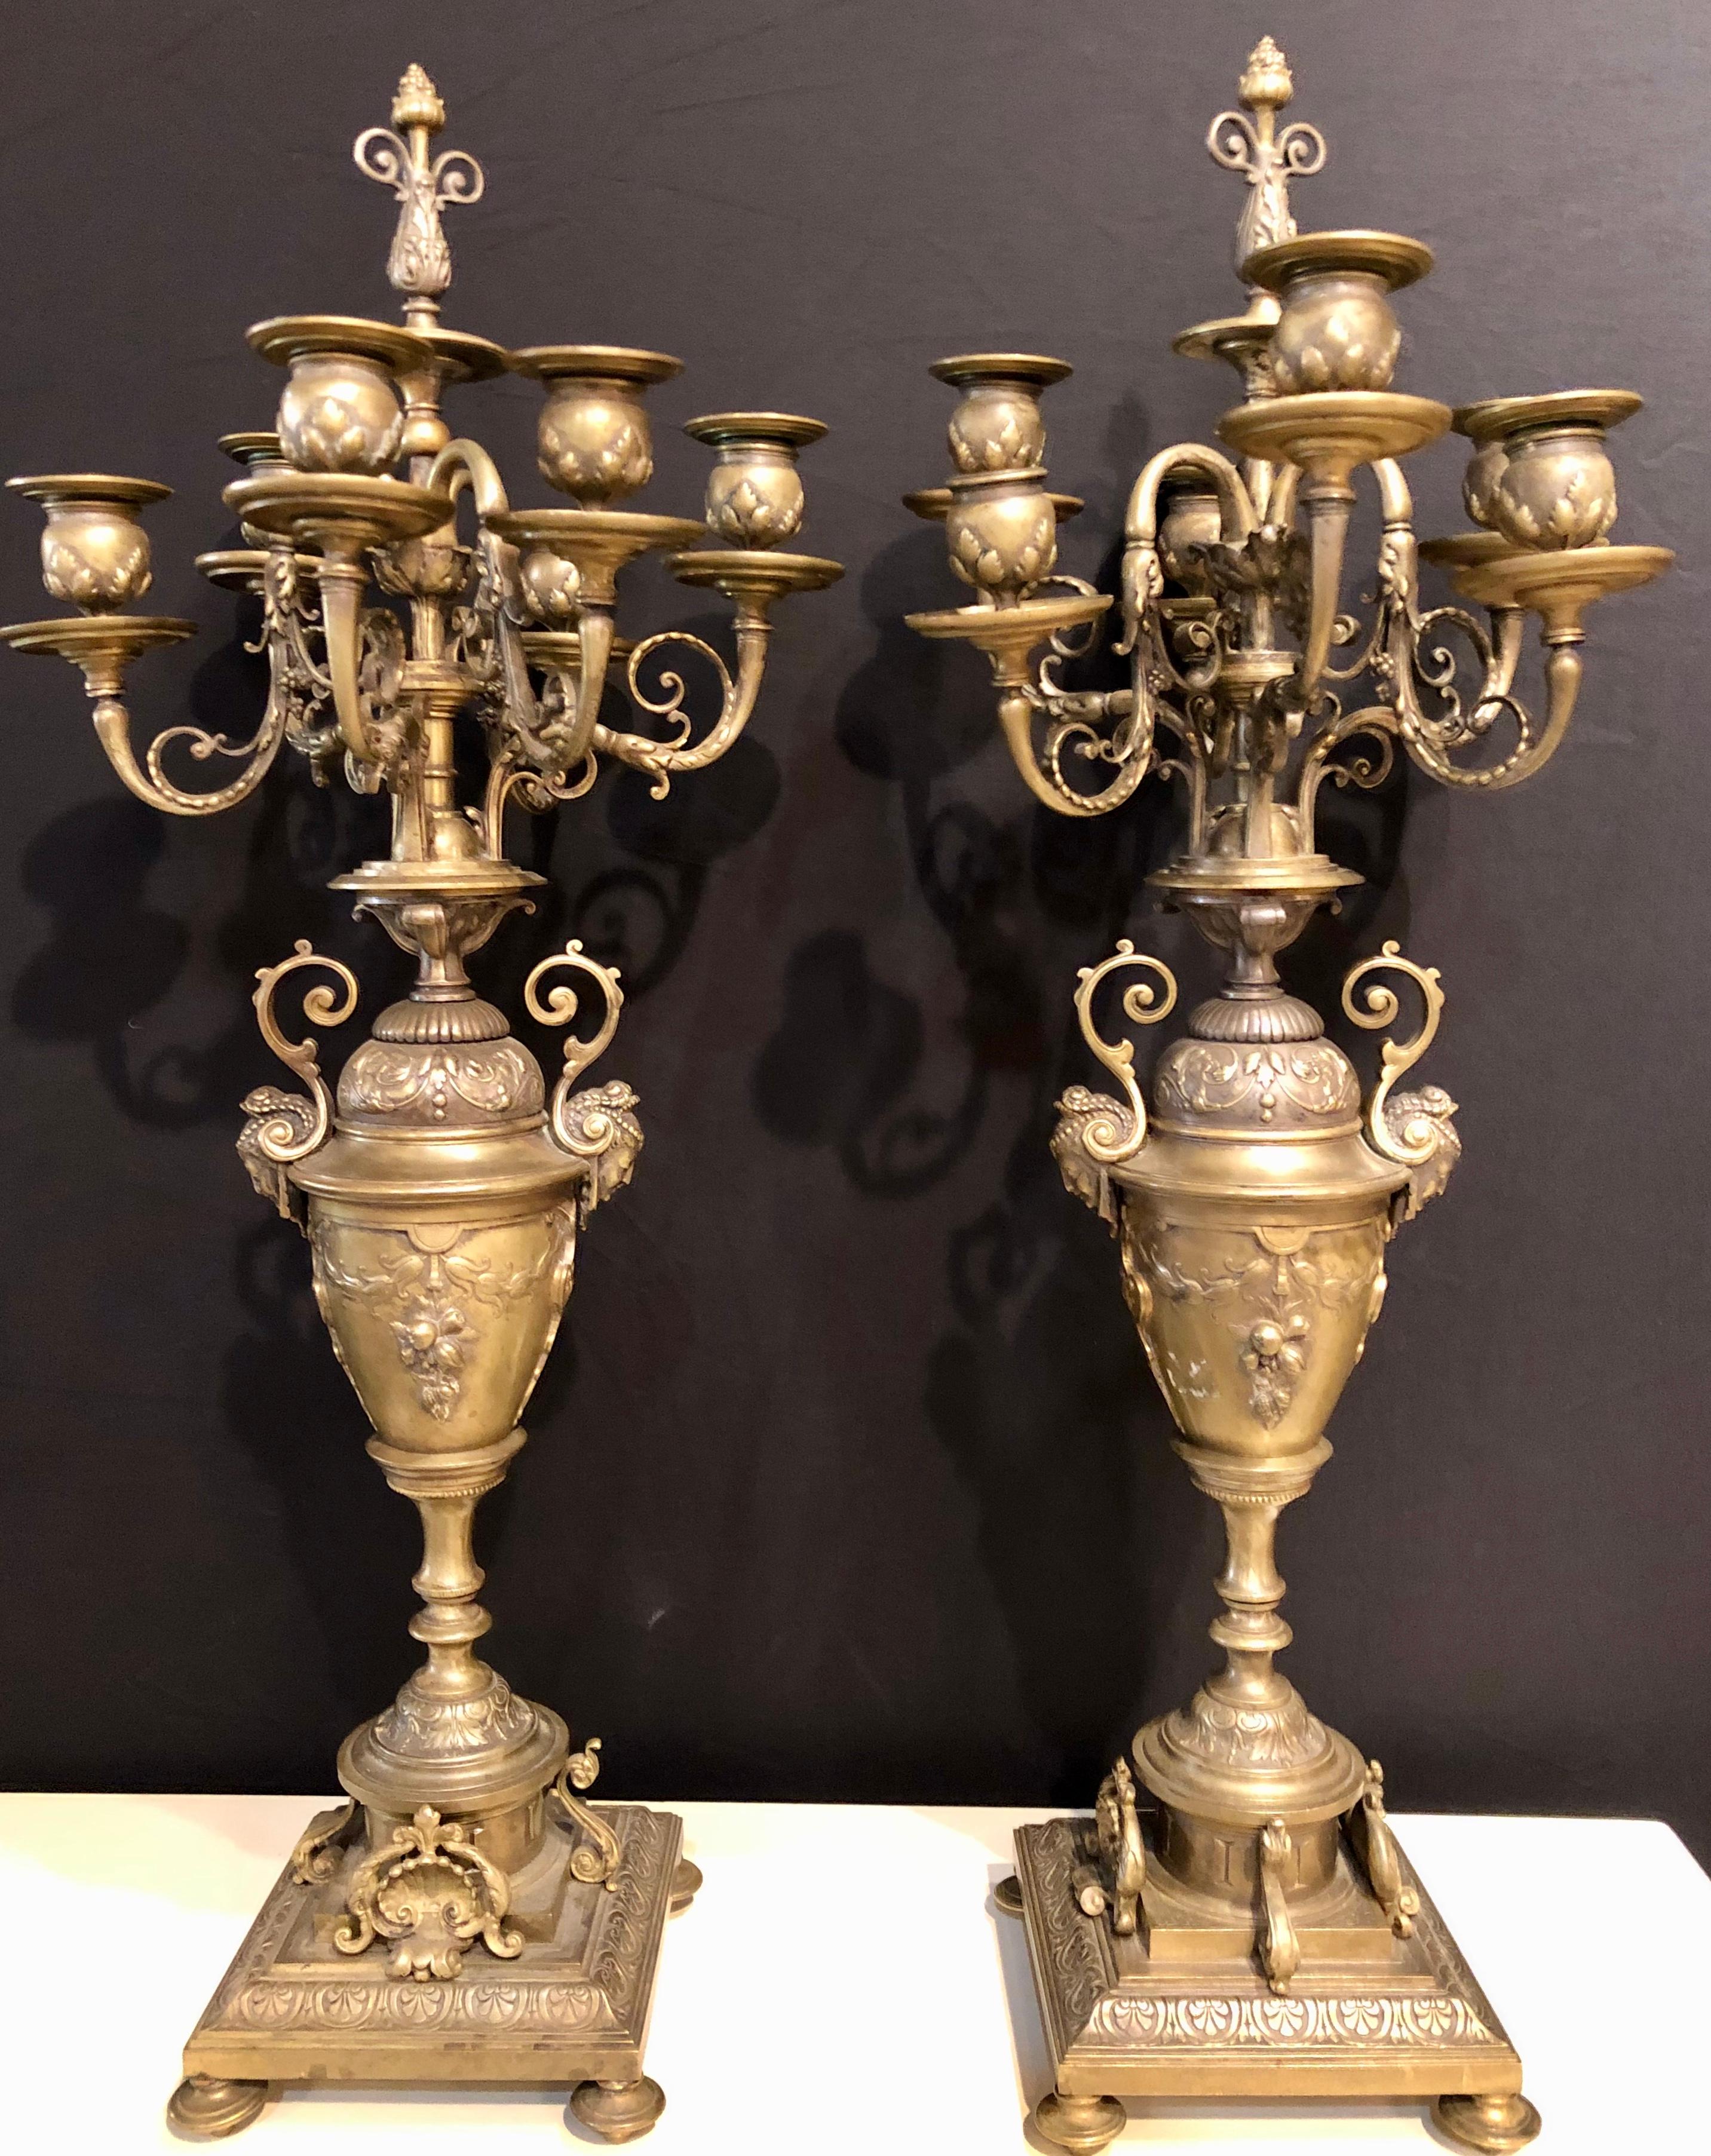 20th Century Pair of Brass Six-Arm Candelabras Bearing Figurative Faces and Fruits